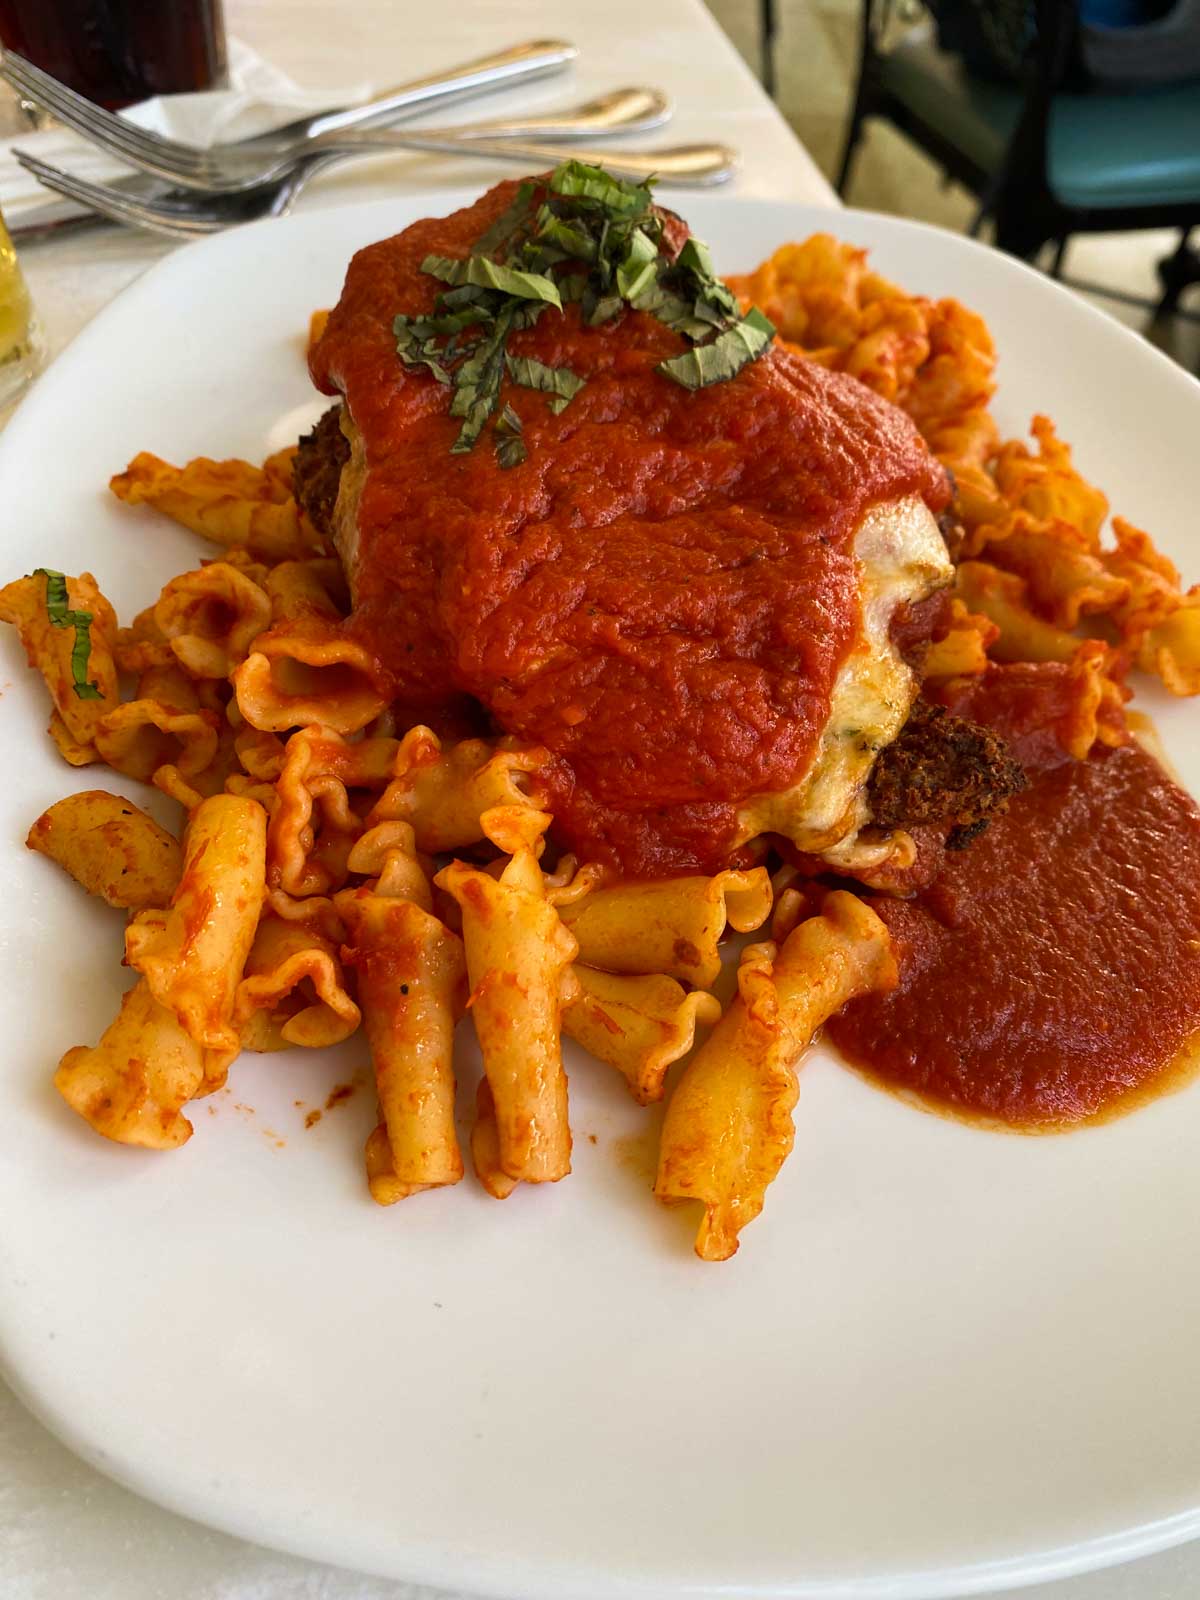 The chicken parmesan is served over campanelle pasta.